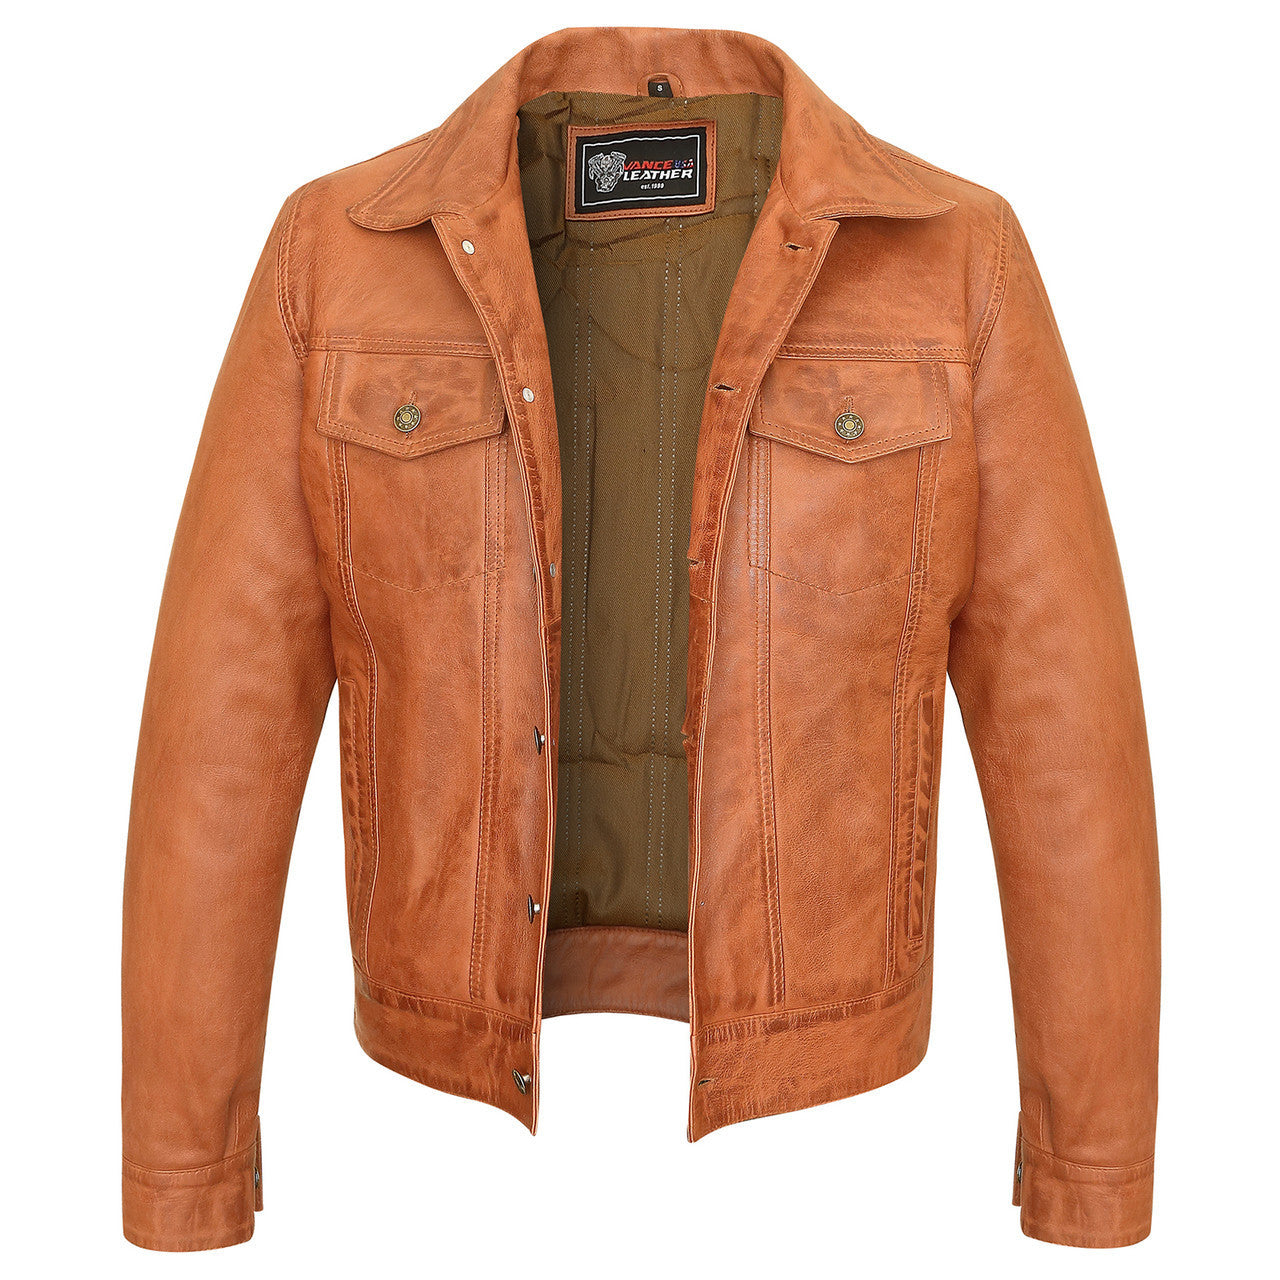 Vance-Leathers-VL555Br-Mens-Austin-Brown-Motorcycle-Trucker-Leather-Jacket-front-view